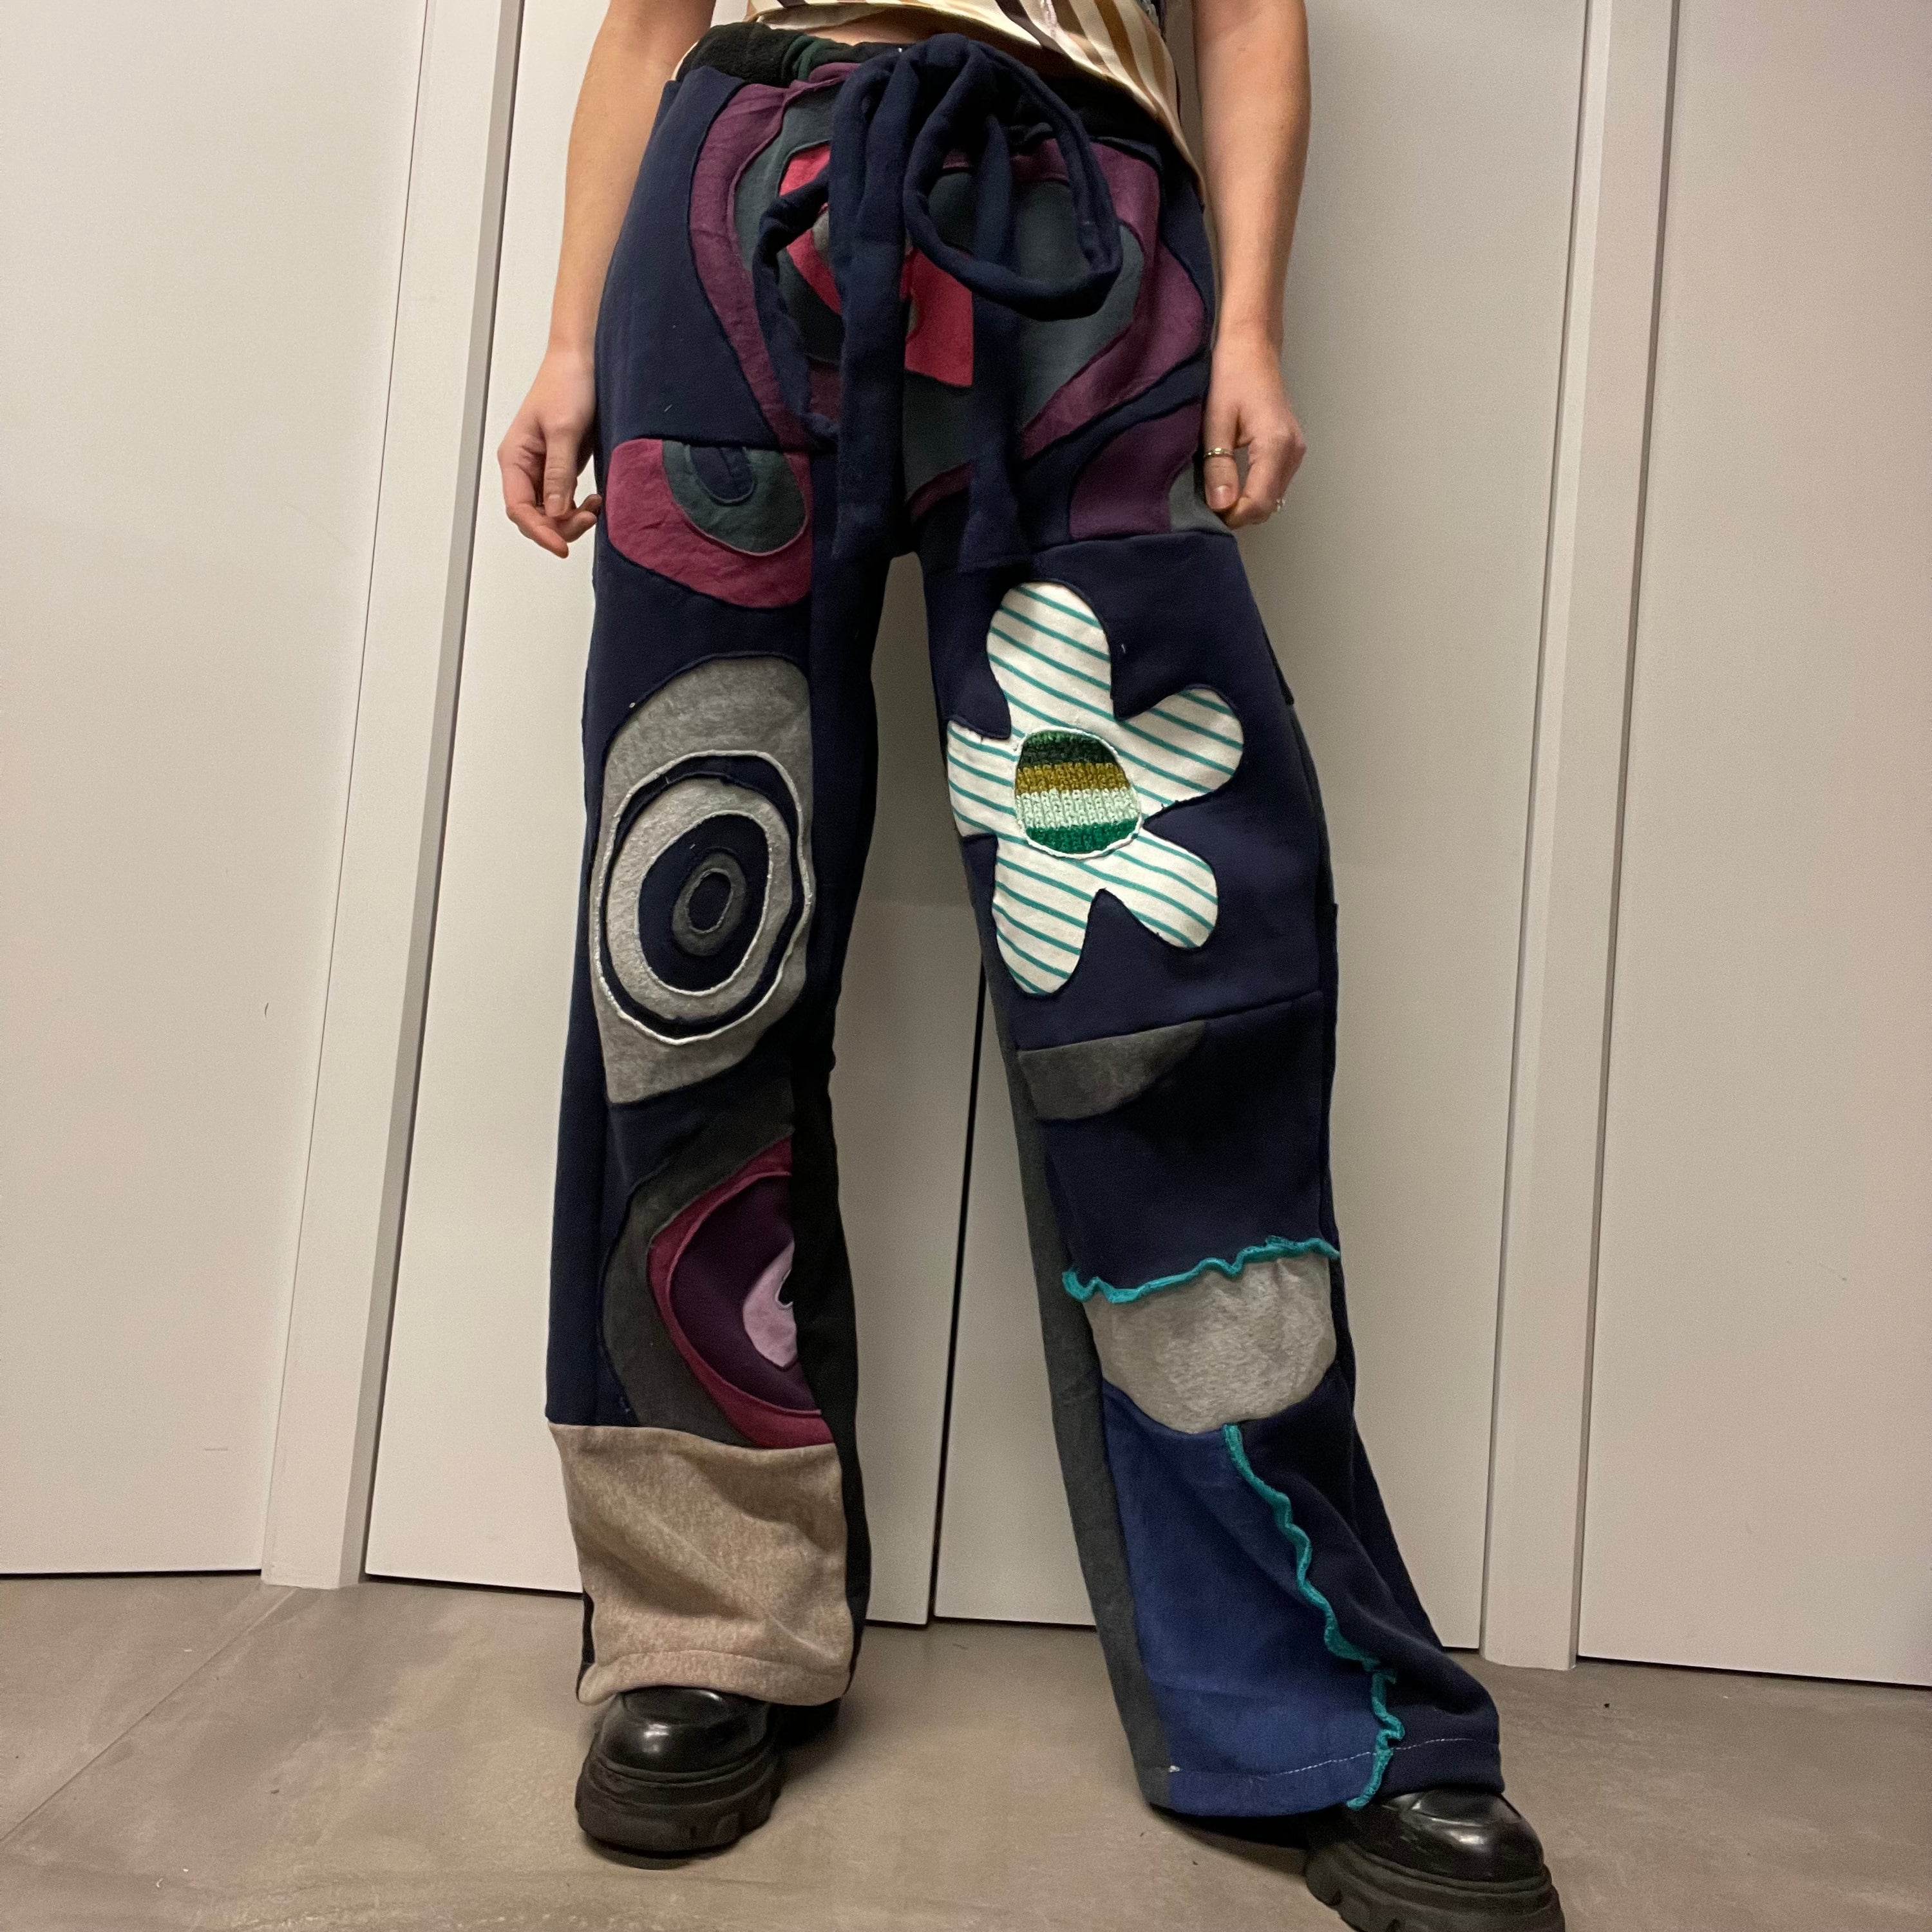 PATCHWORK TROUSERS / 2049. / M